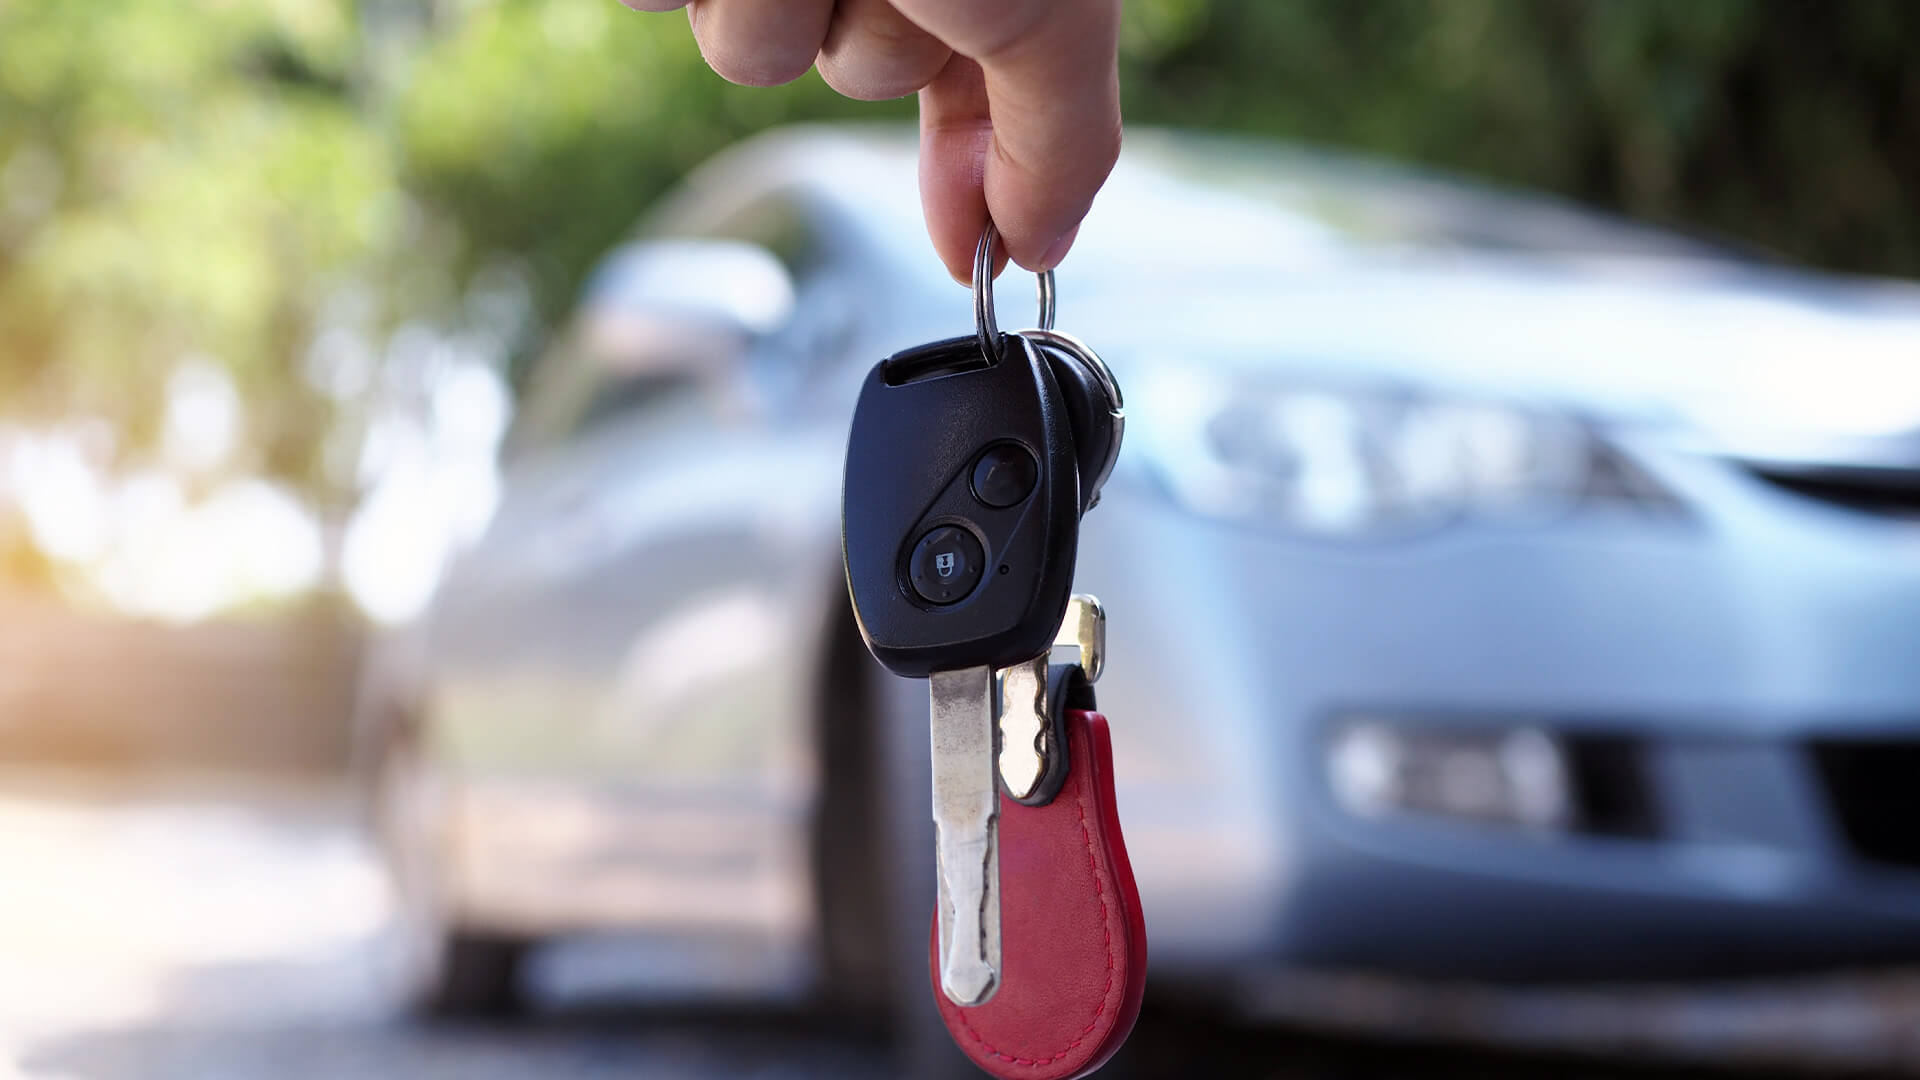 Closeup of ghand holding car keys. A car is in the background, out of focus.